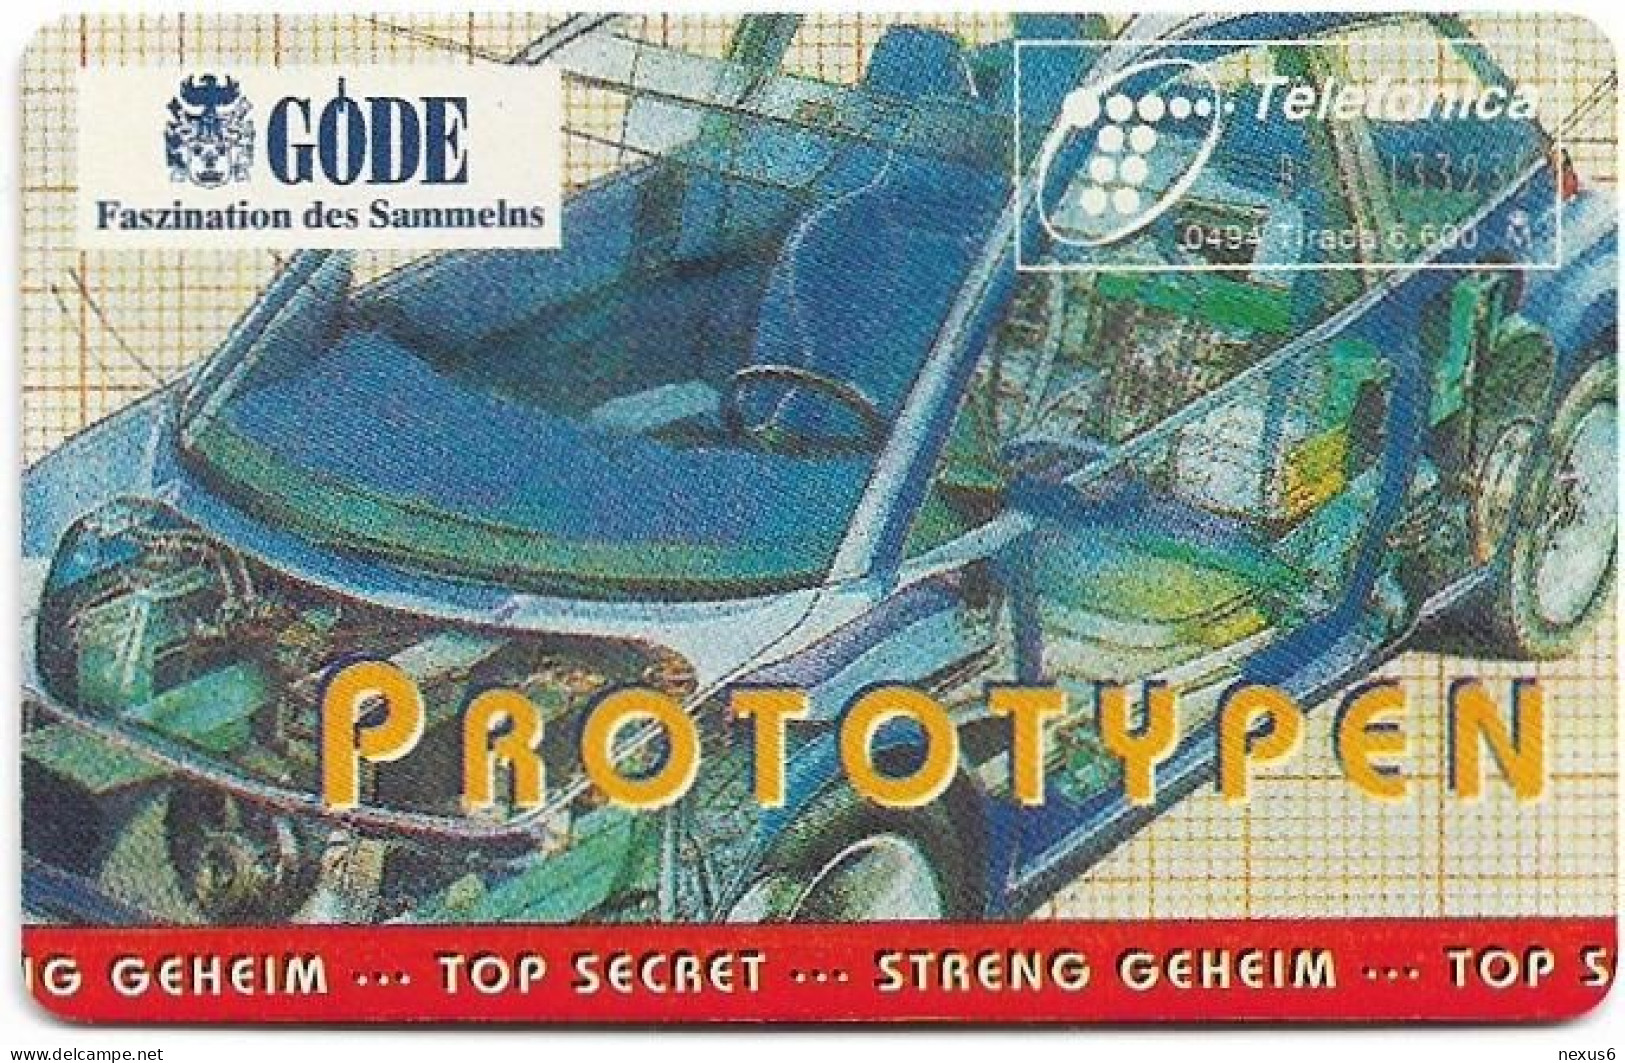 Spain - Telefónica - Cars (Prototypes) - Concept 1 Volkswagen - P-072 - 04.1994, 100PTA, 6.600ex, Mint - Private Issues